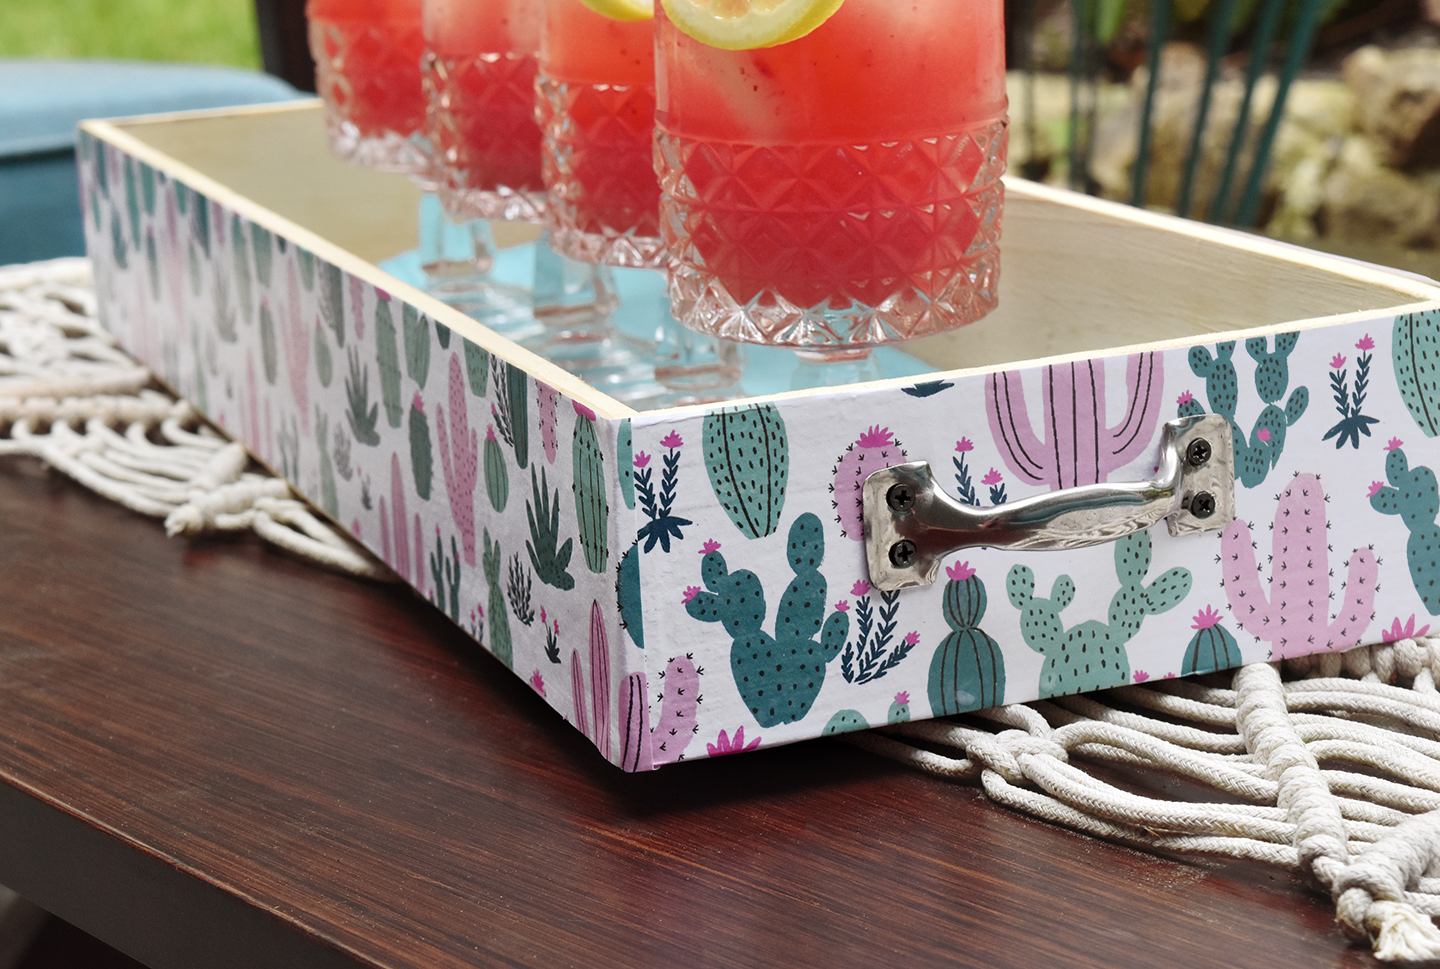 Taste of Summer: Easy DIY Serving Tray... Plus A Delicious Mocktail Recipe! /// By Design Fixation #diy #tray #mocktail